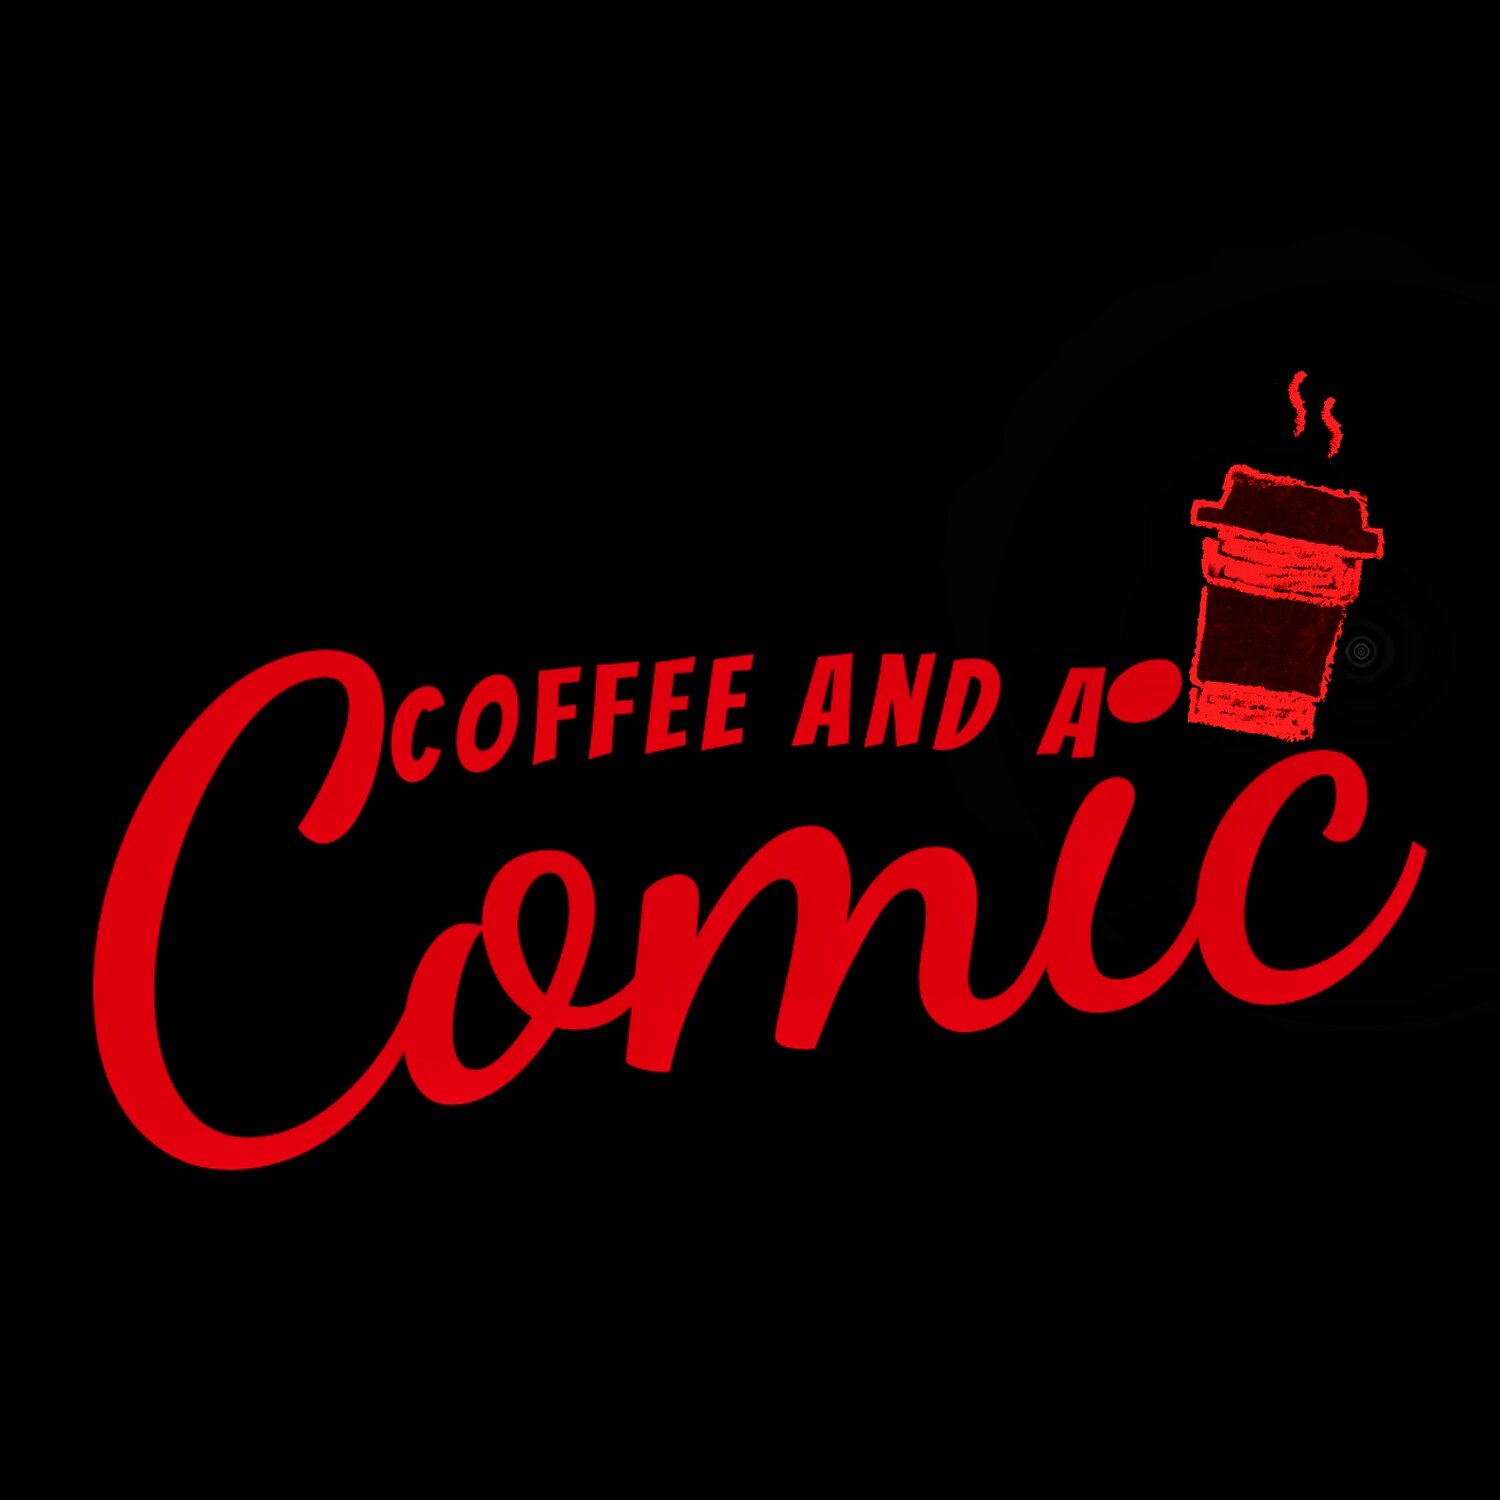 Get a Free Cup of Coffee with Every Purchase at Coffee And A Comic